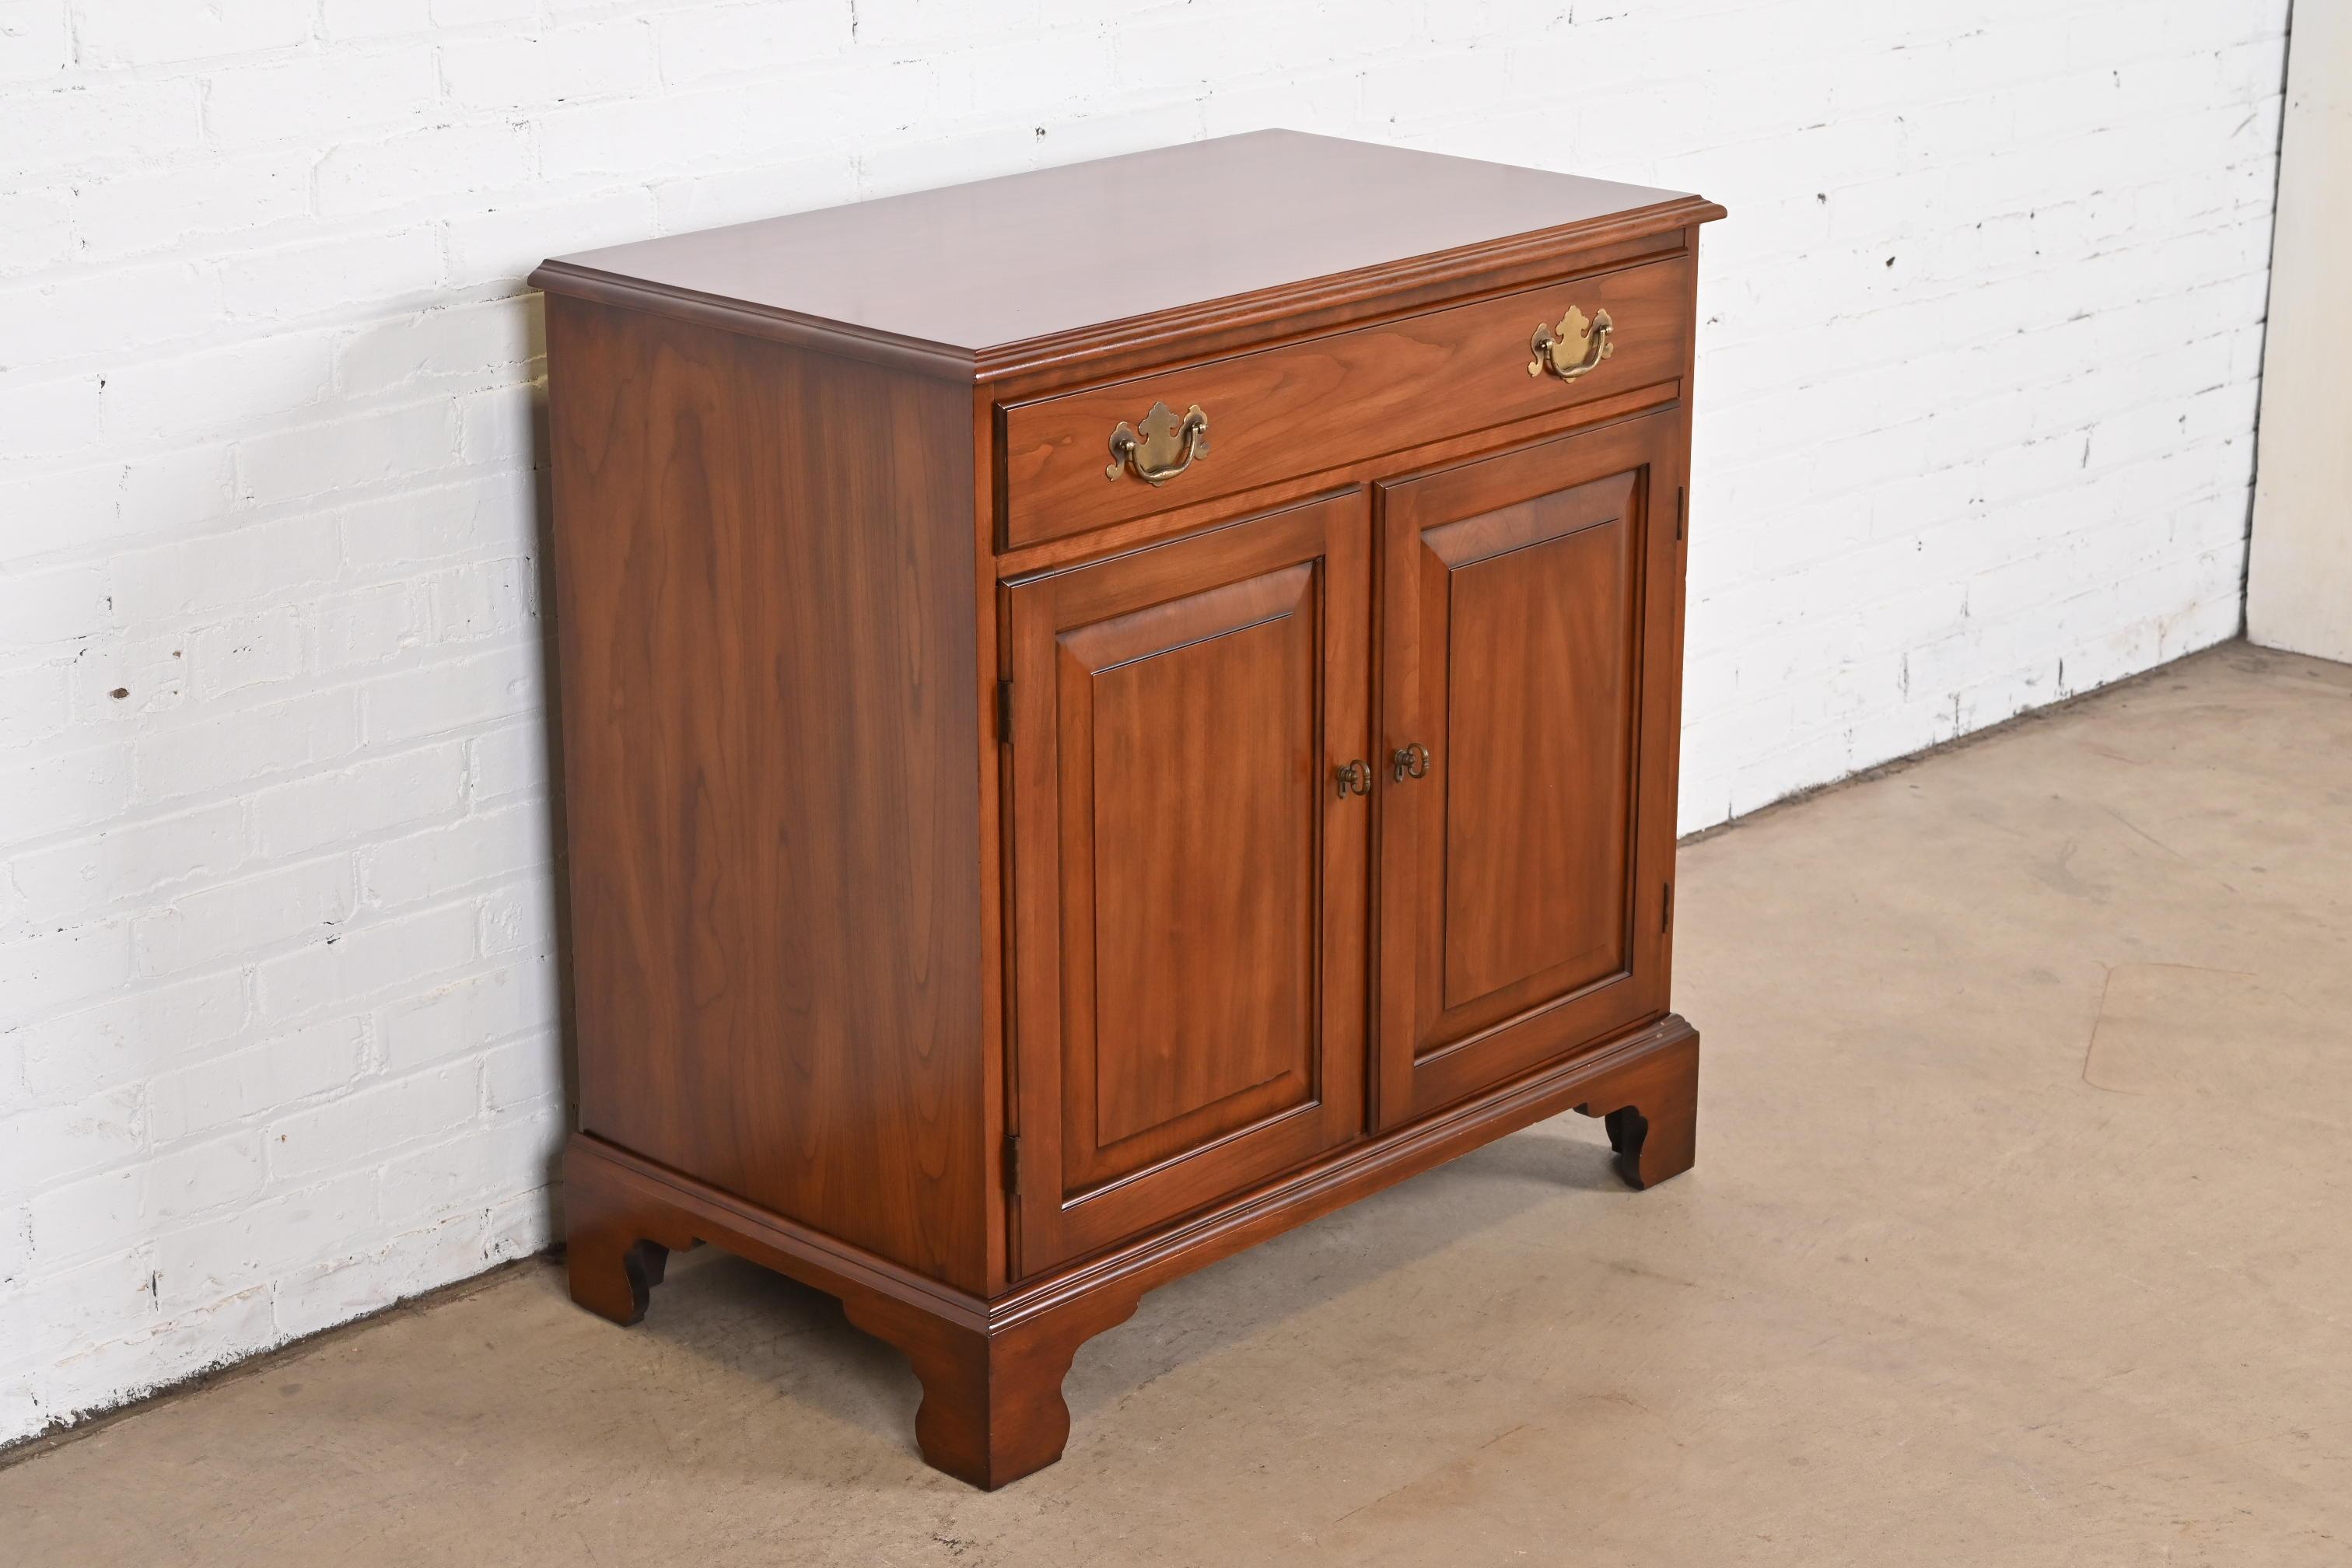 Mid-20th Century Henkel Harris American Colonial Cherry Wood Server or Bar Cabinet, Restored For Sale